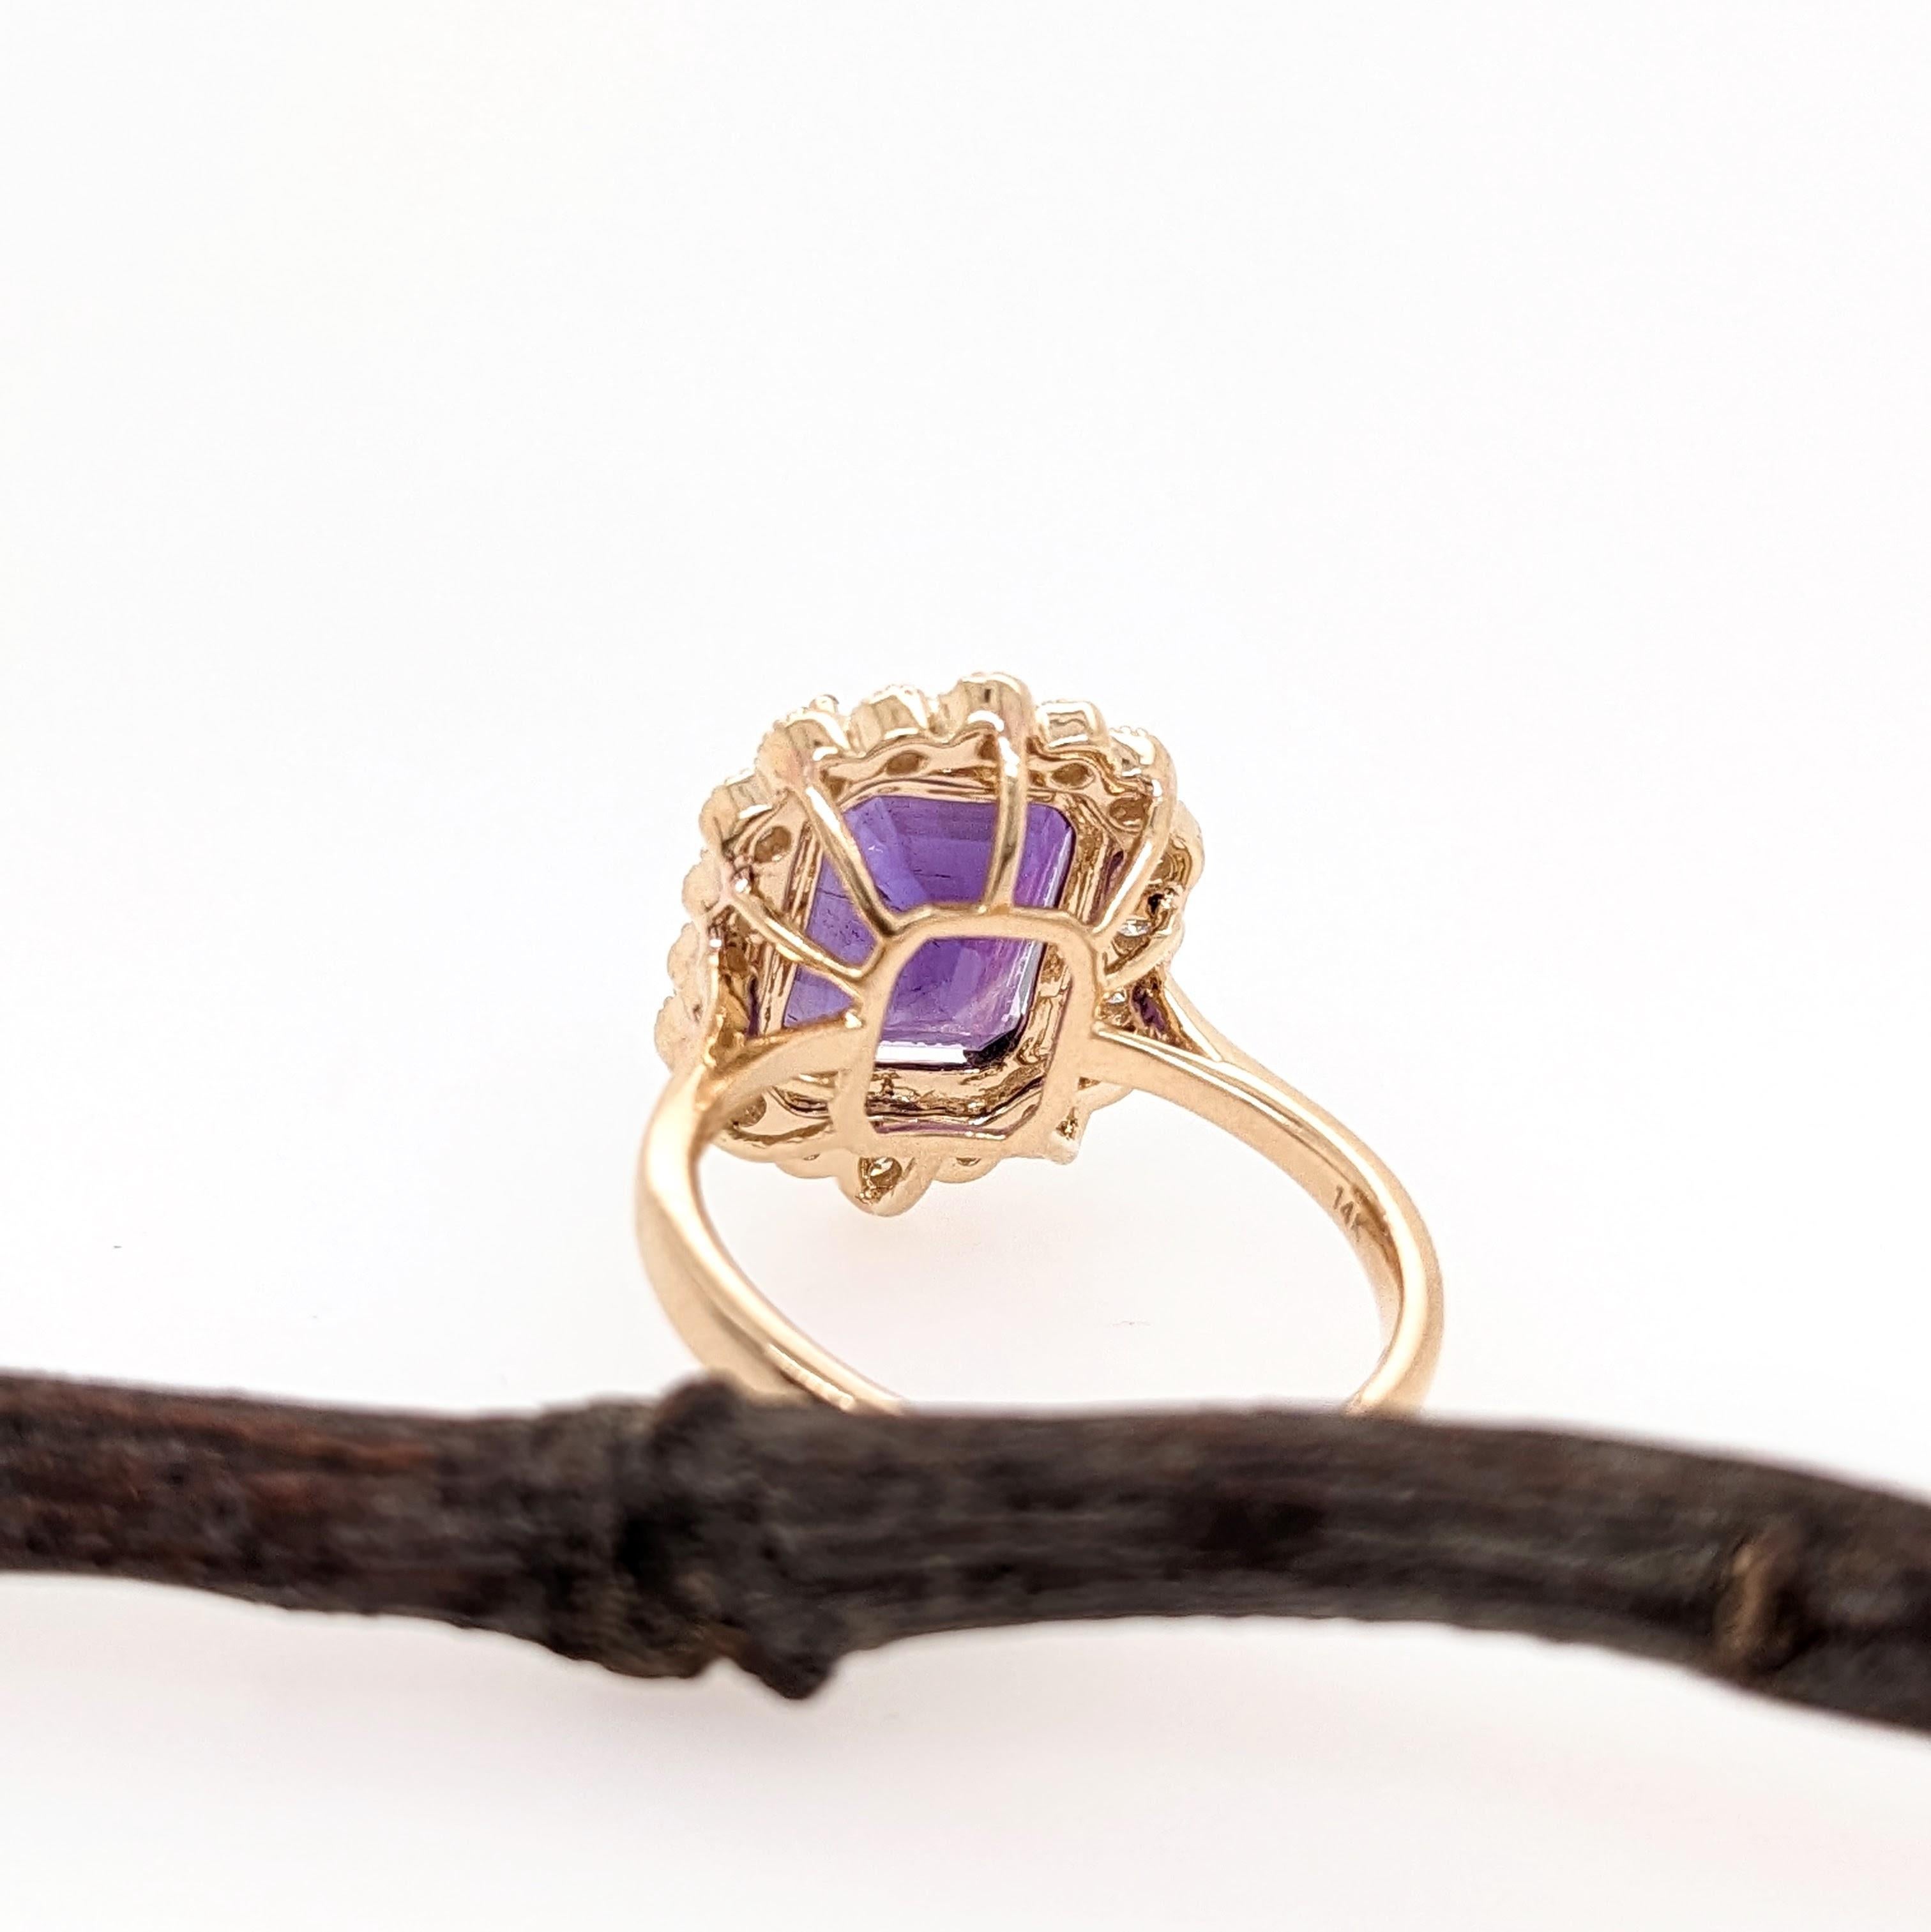 3.1ct Amethyst Ring w Earth Mined Diamonds in Solid 14K Yellow Gold EM 11x8mm For Sale 3